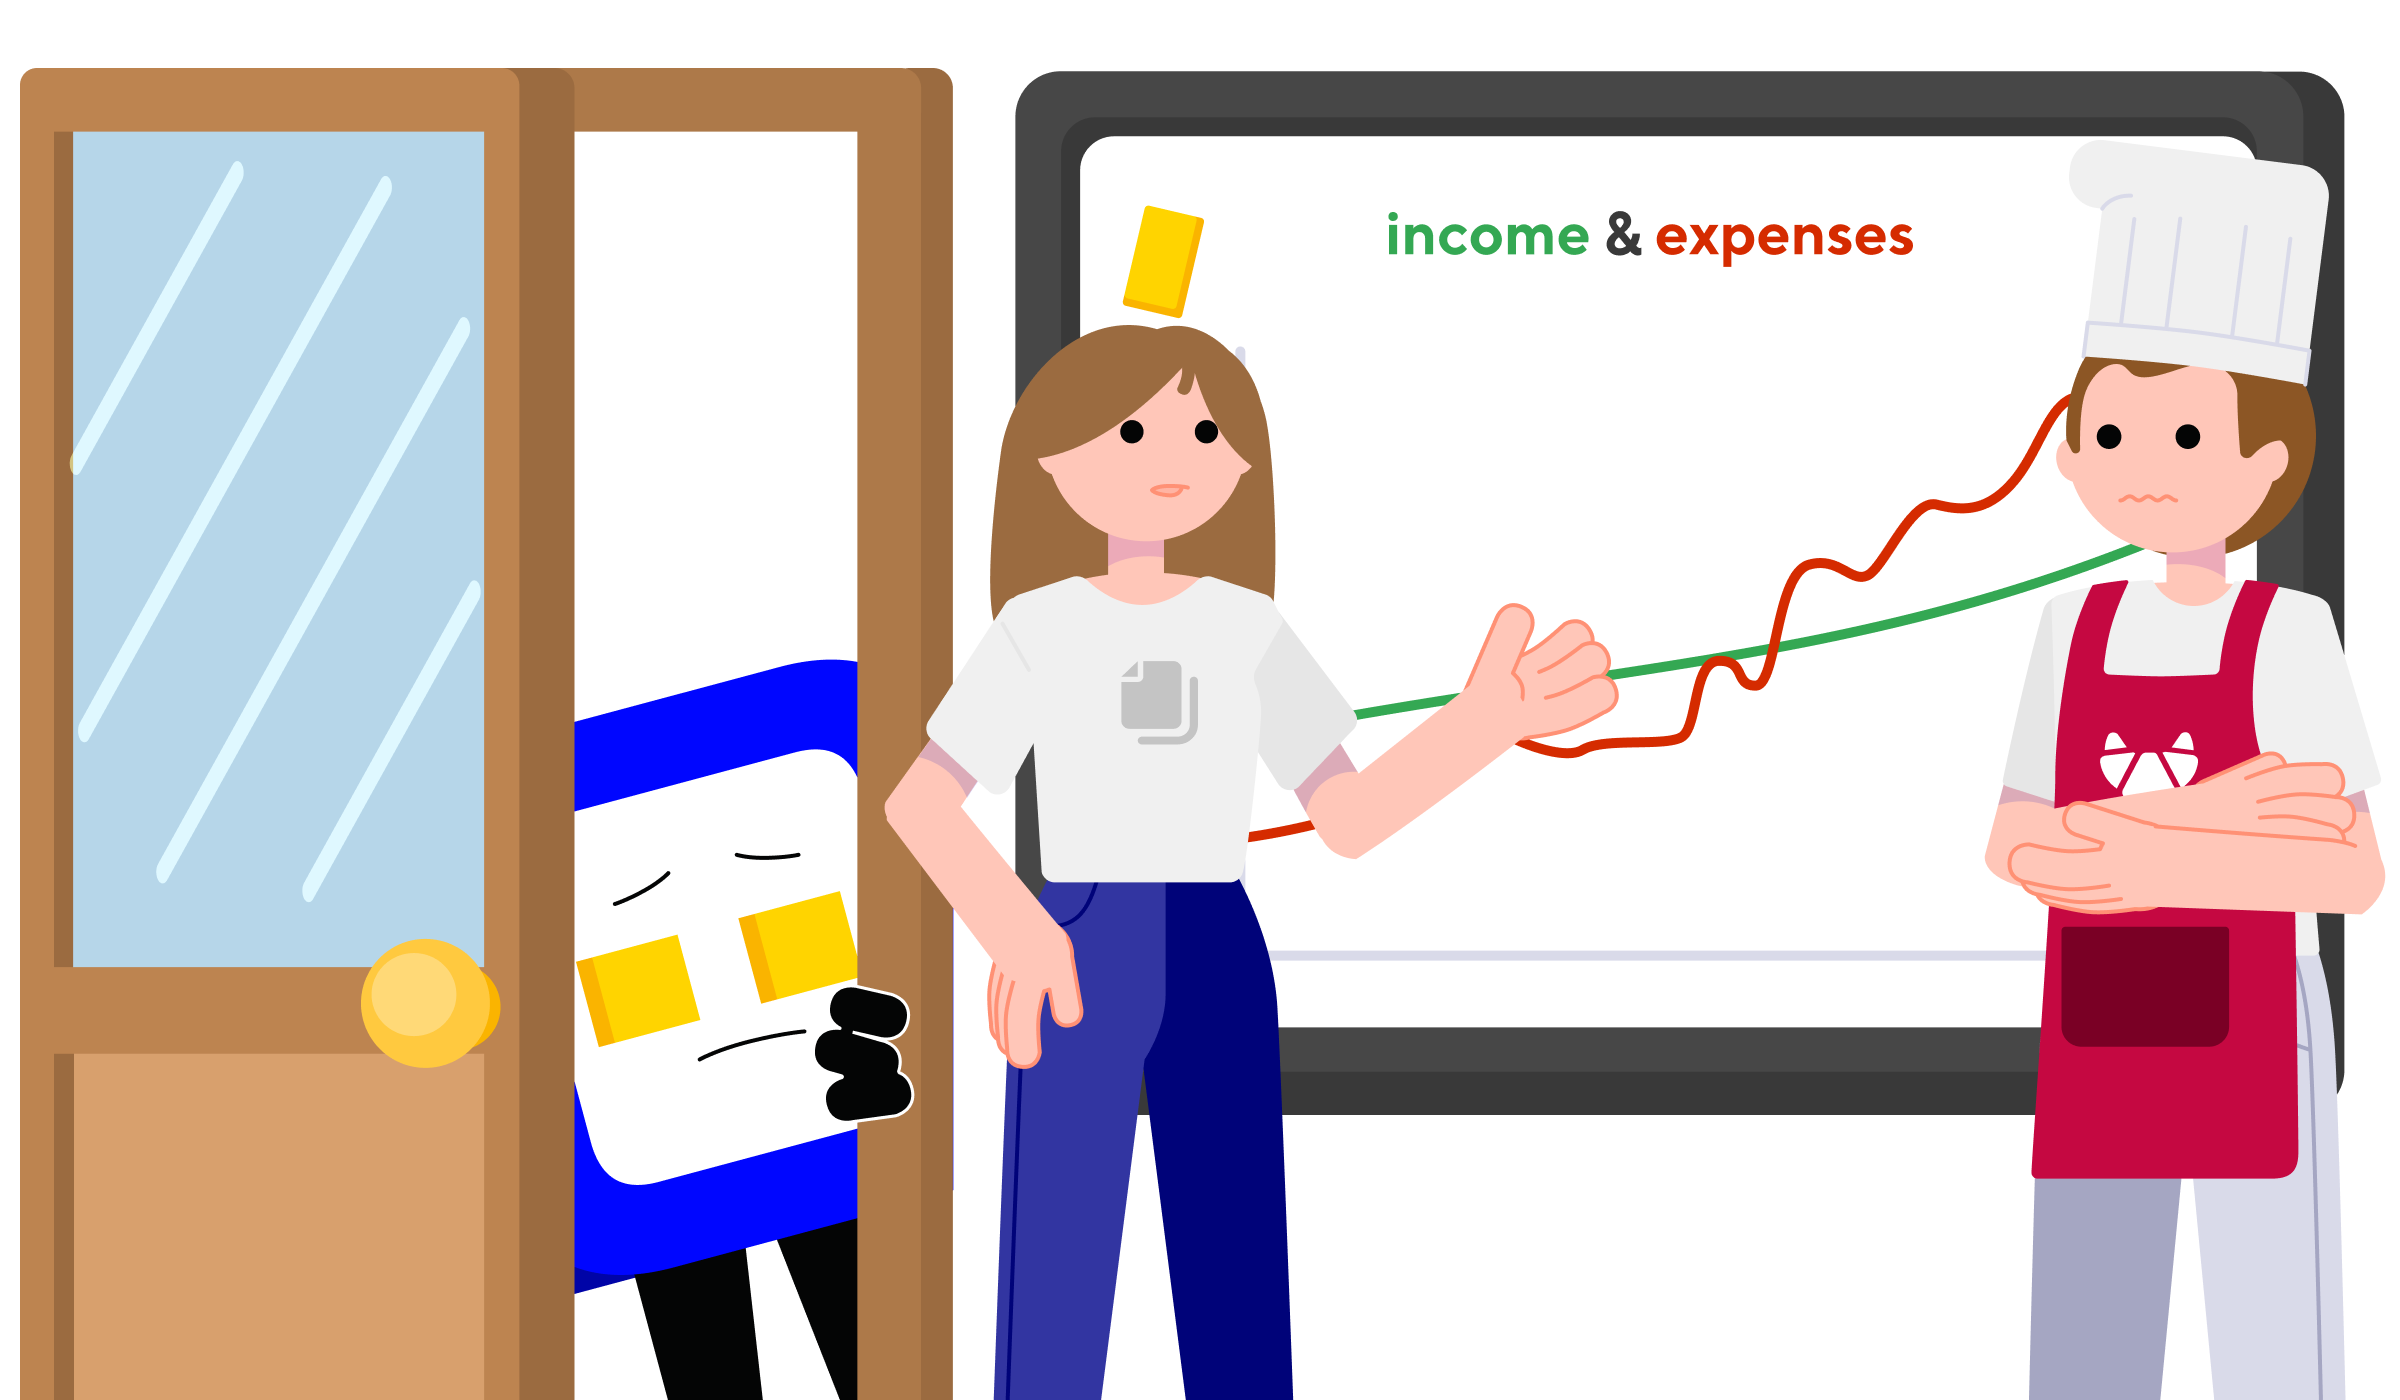 Income & expenses